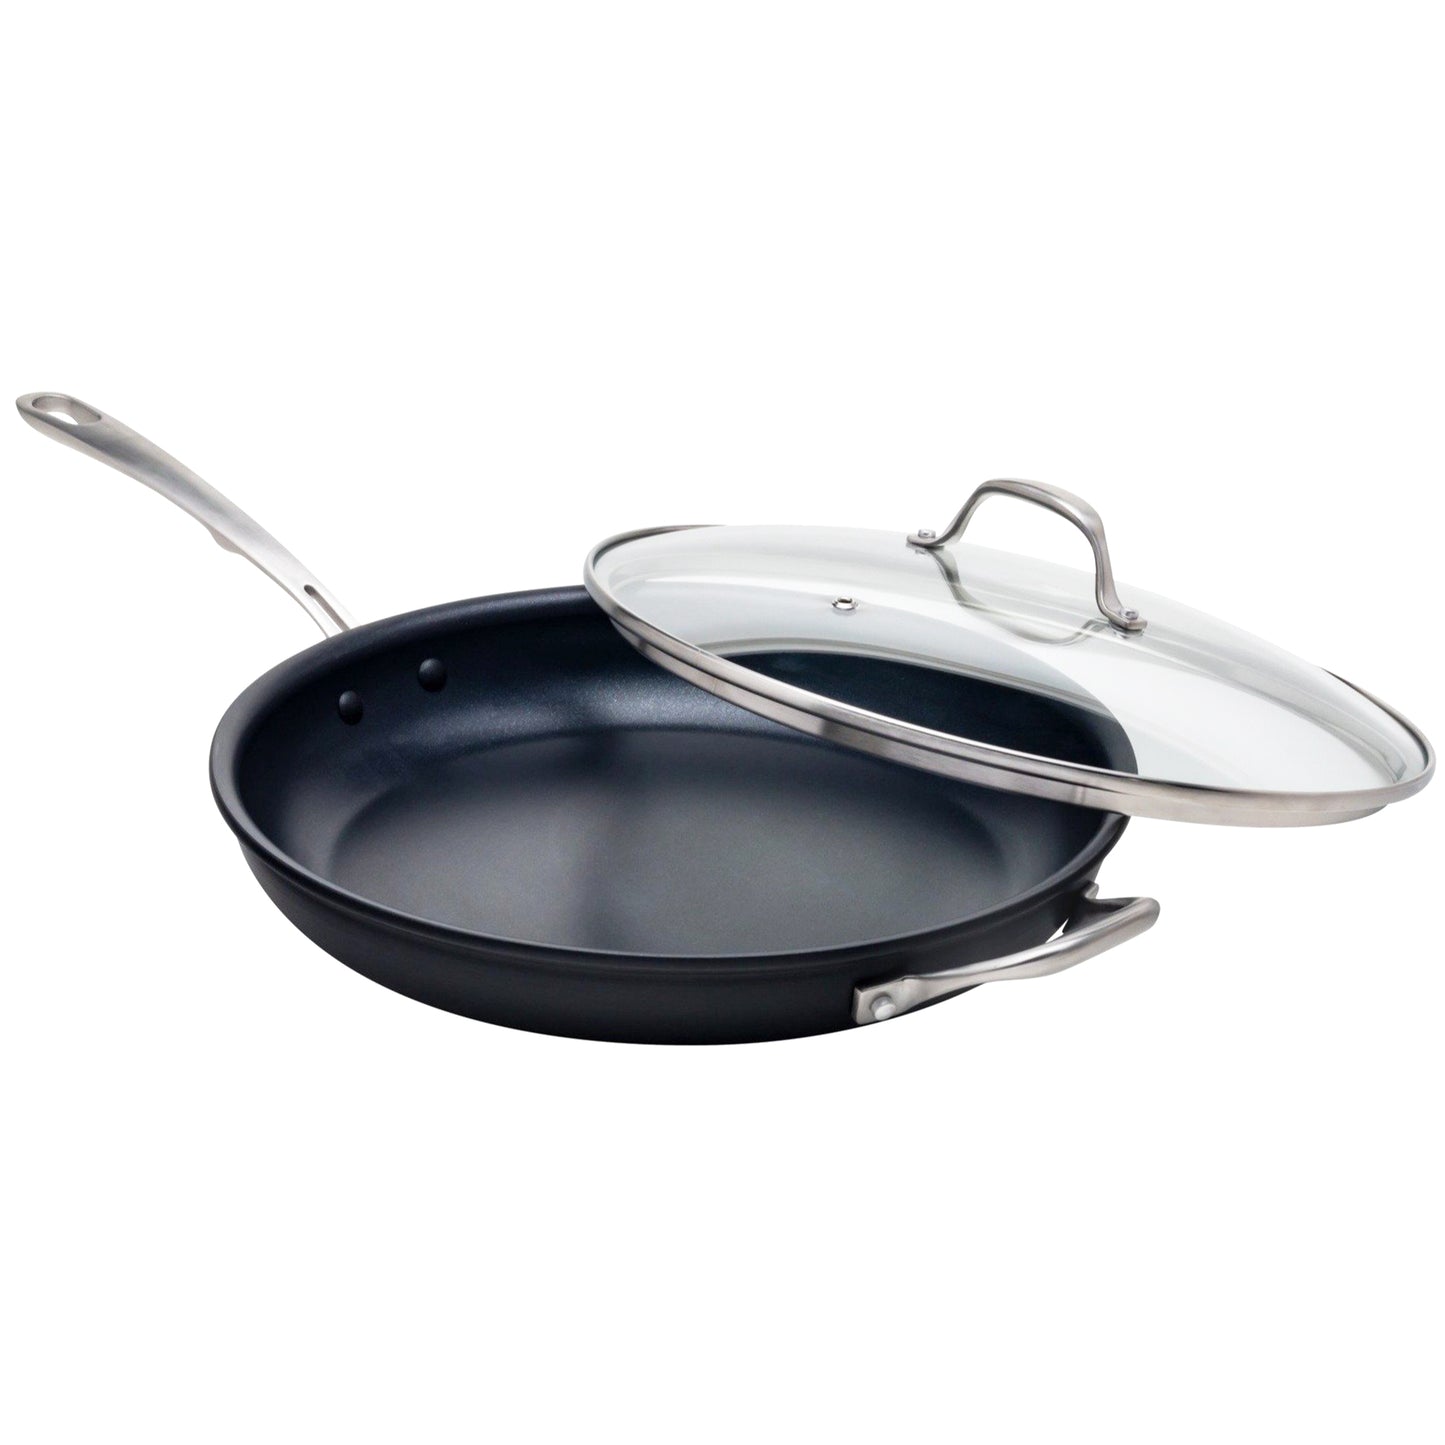 HLAFRG Nonstick Pan 12 inch Frying Pan with Lid, Skillet Nonstick with Lid, Black Marble Aluminium Cookware, Non Toxic APEO & PFOA Free,with